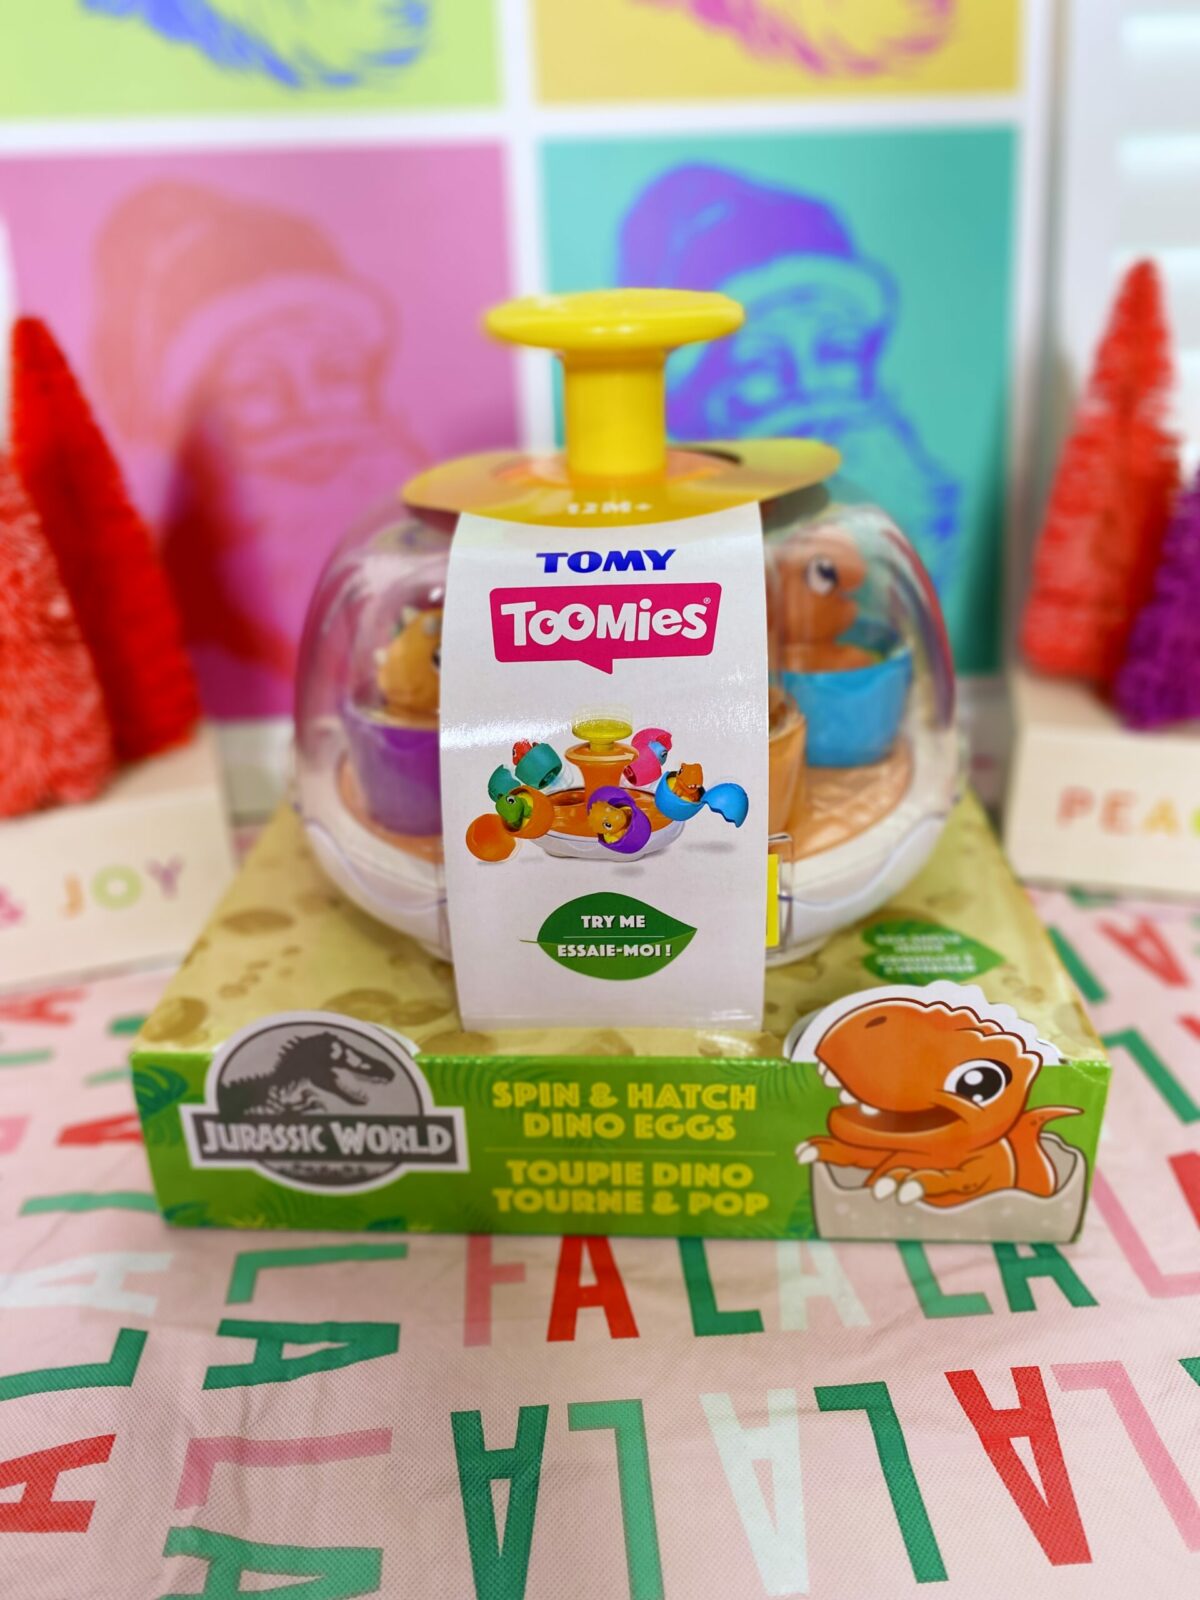 Baby + Toddler Gift Ideas ft. TOMY (Peppa Pig, Jurassic World + More!) -  Love for Lacquer